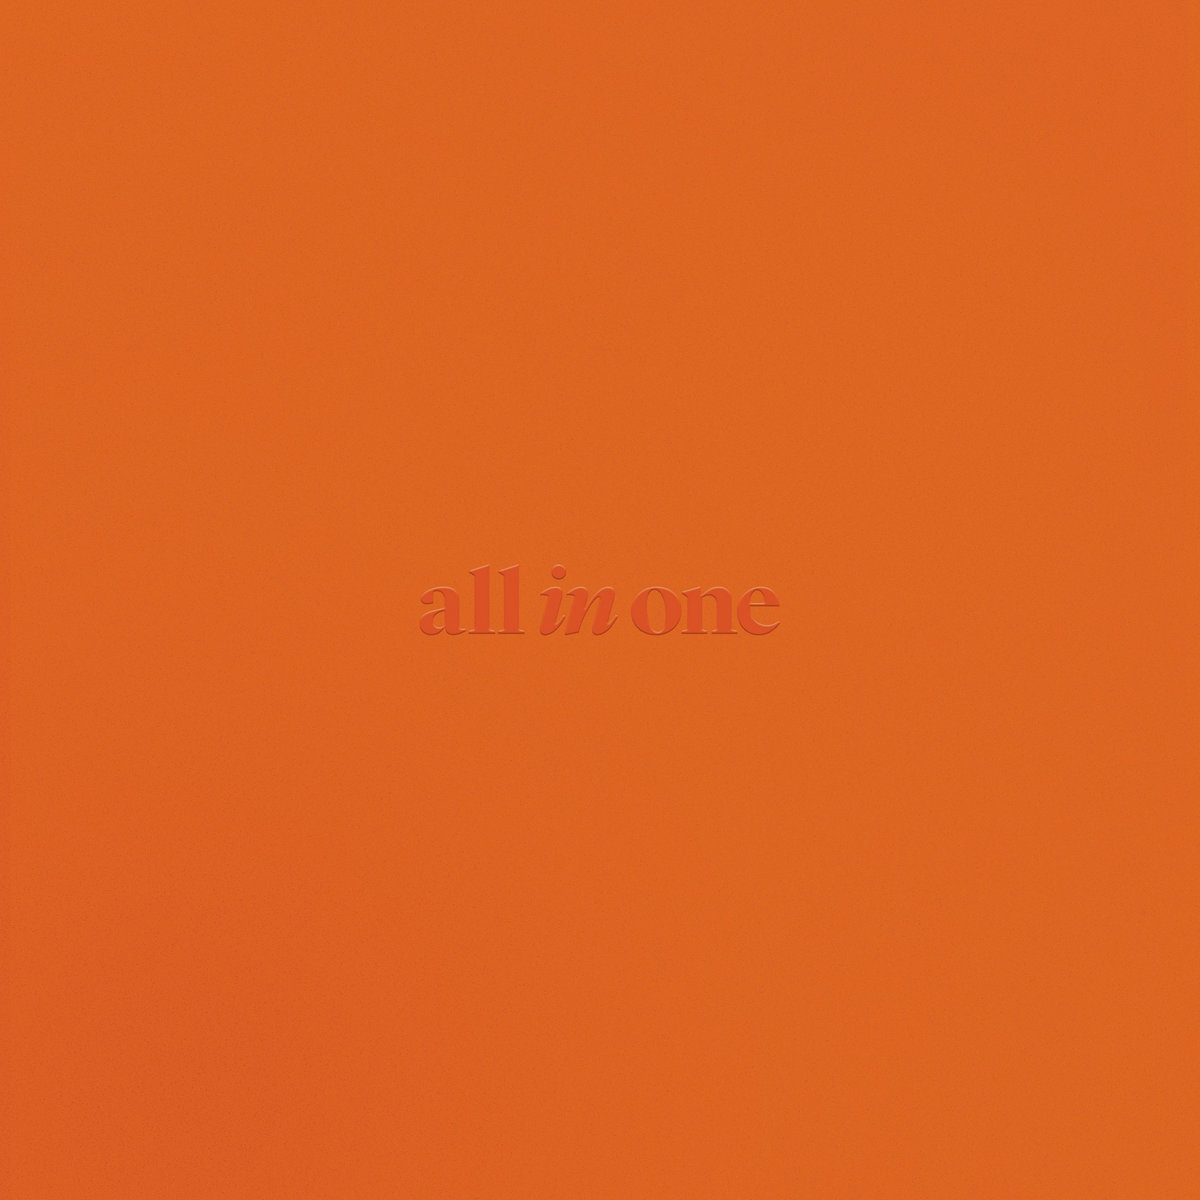 All In One - All In One